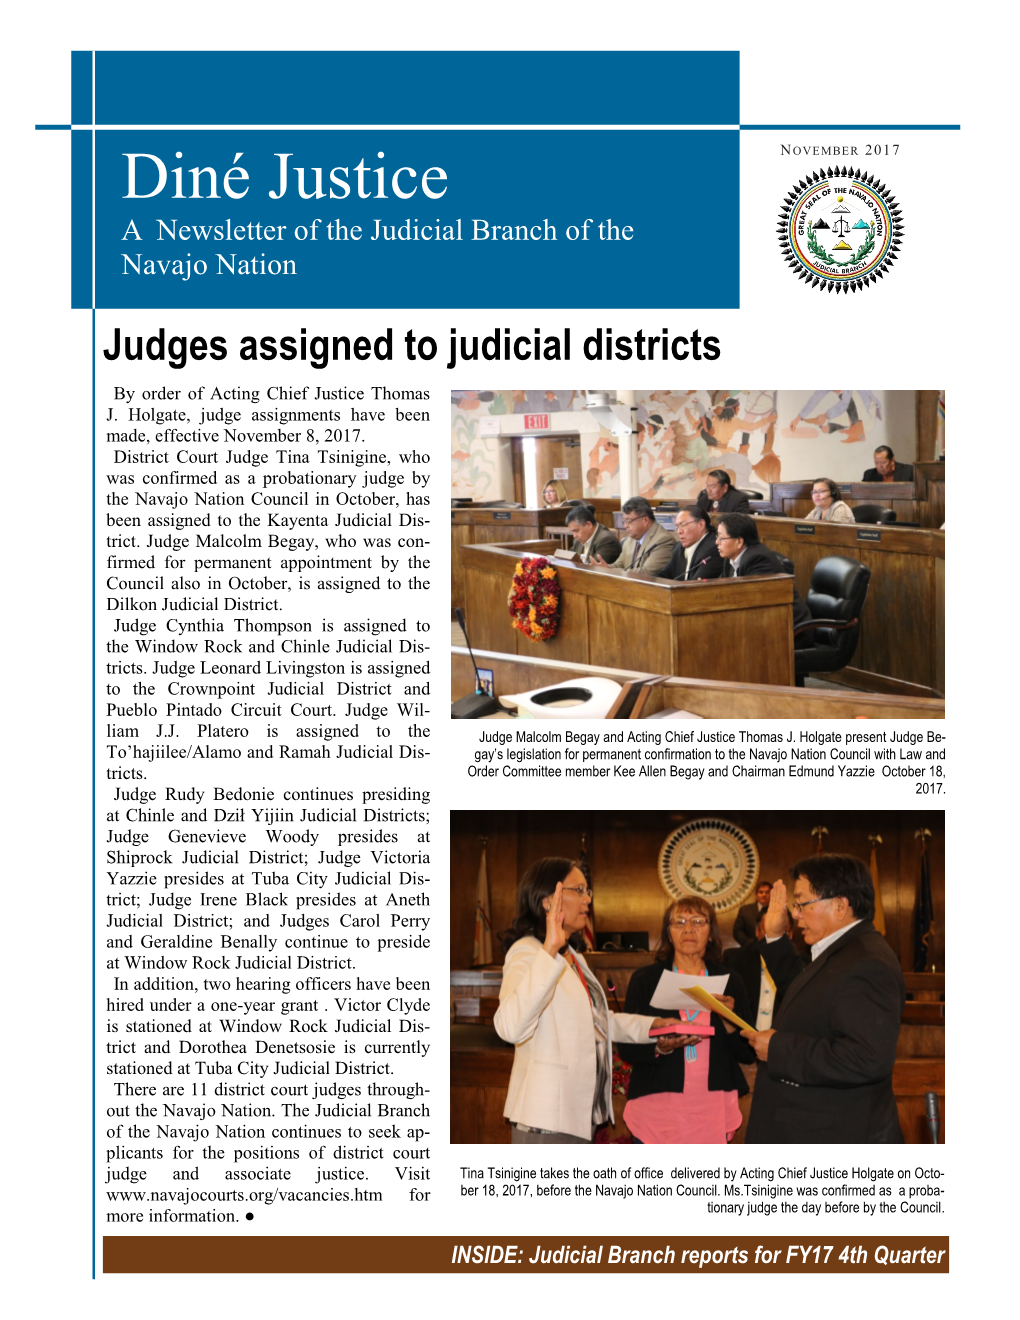 Diné Justice a Newsletter of the Judicial Branch of the Navajo Nation